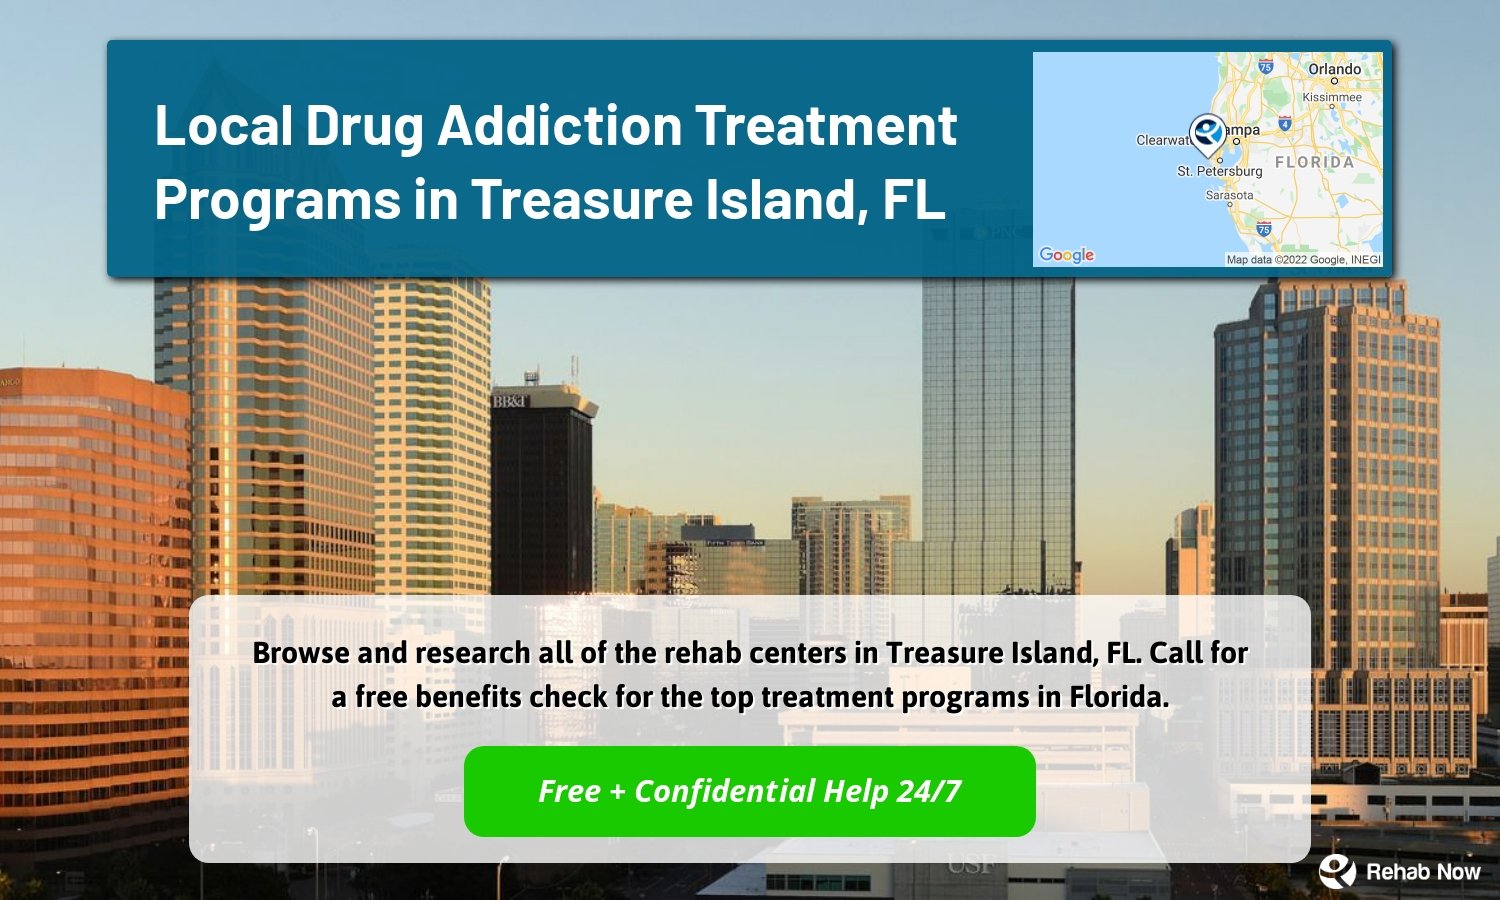 Browse and research all of the rehab centers in Treasure Island, FL. Call for a free benefits check for the top treatment programs in Florida.